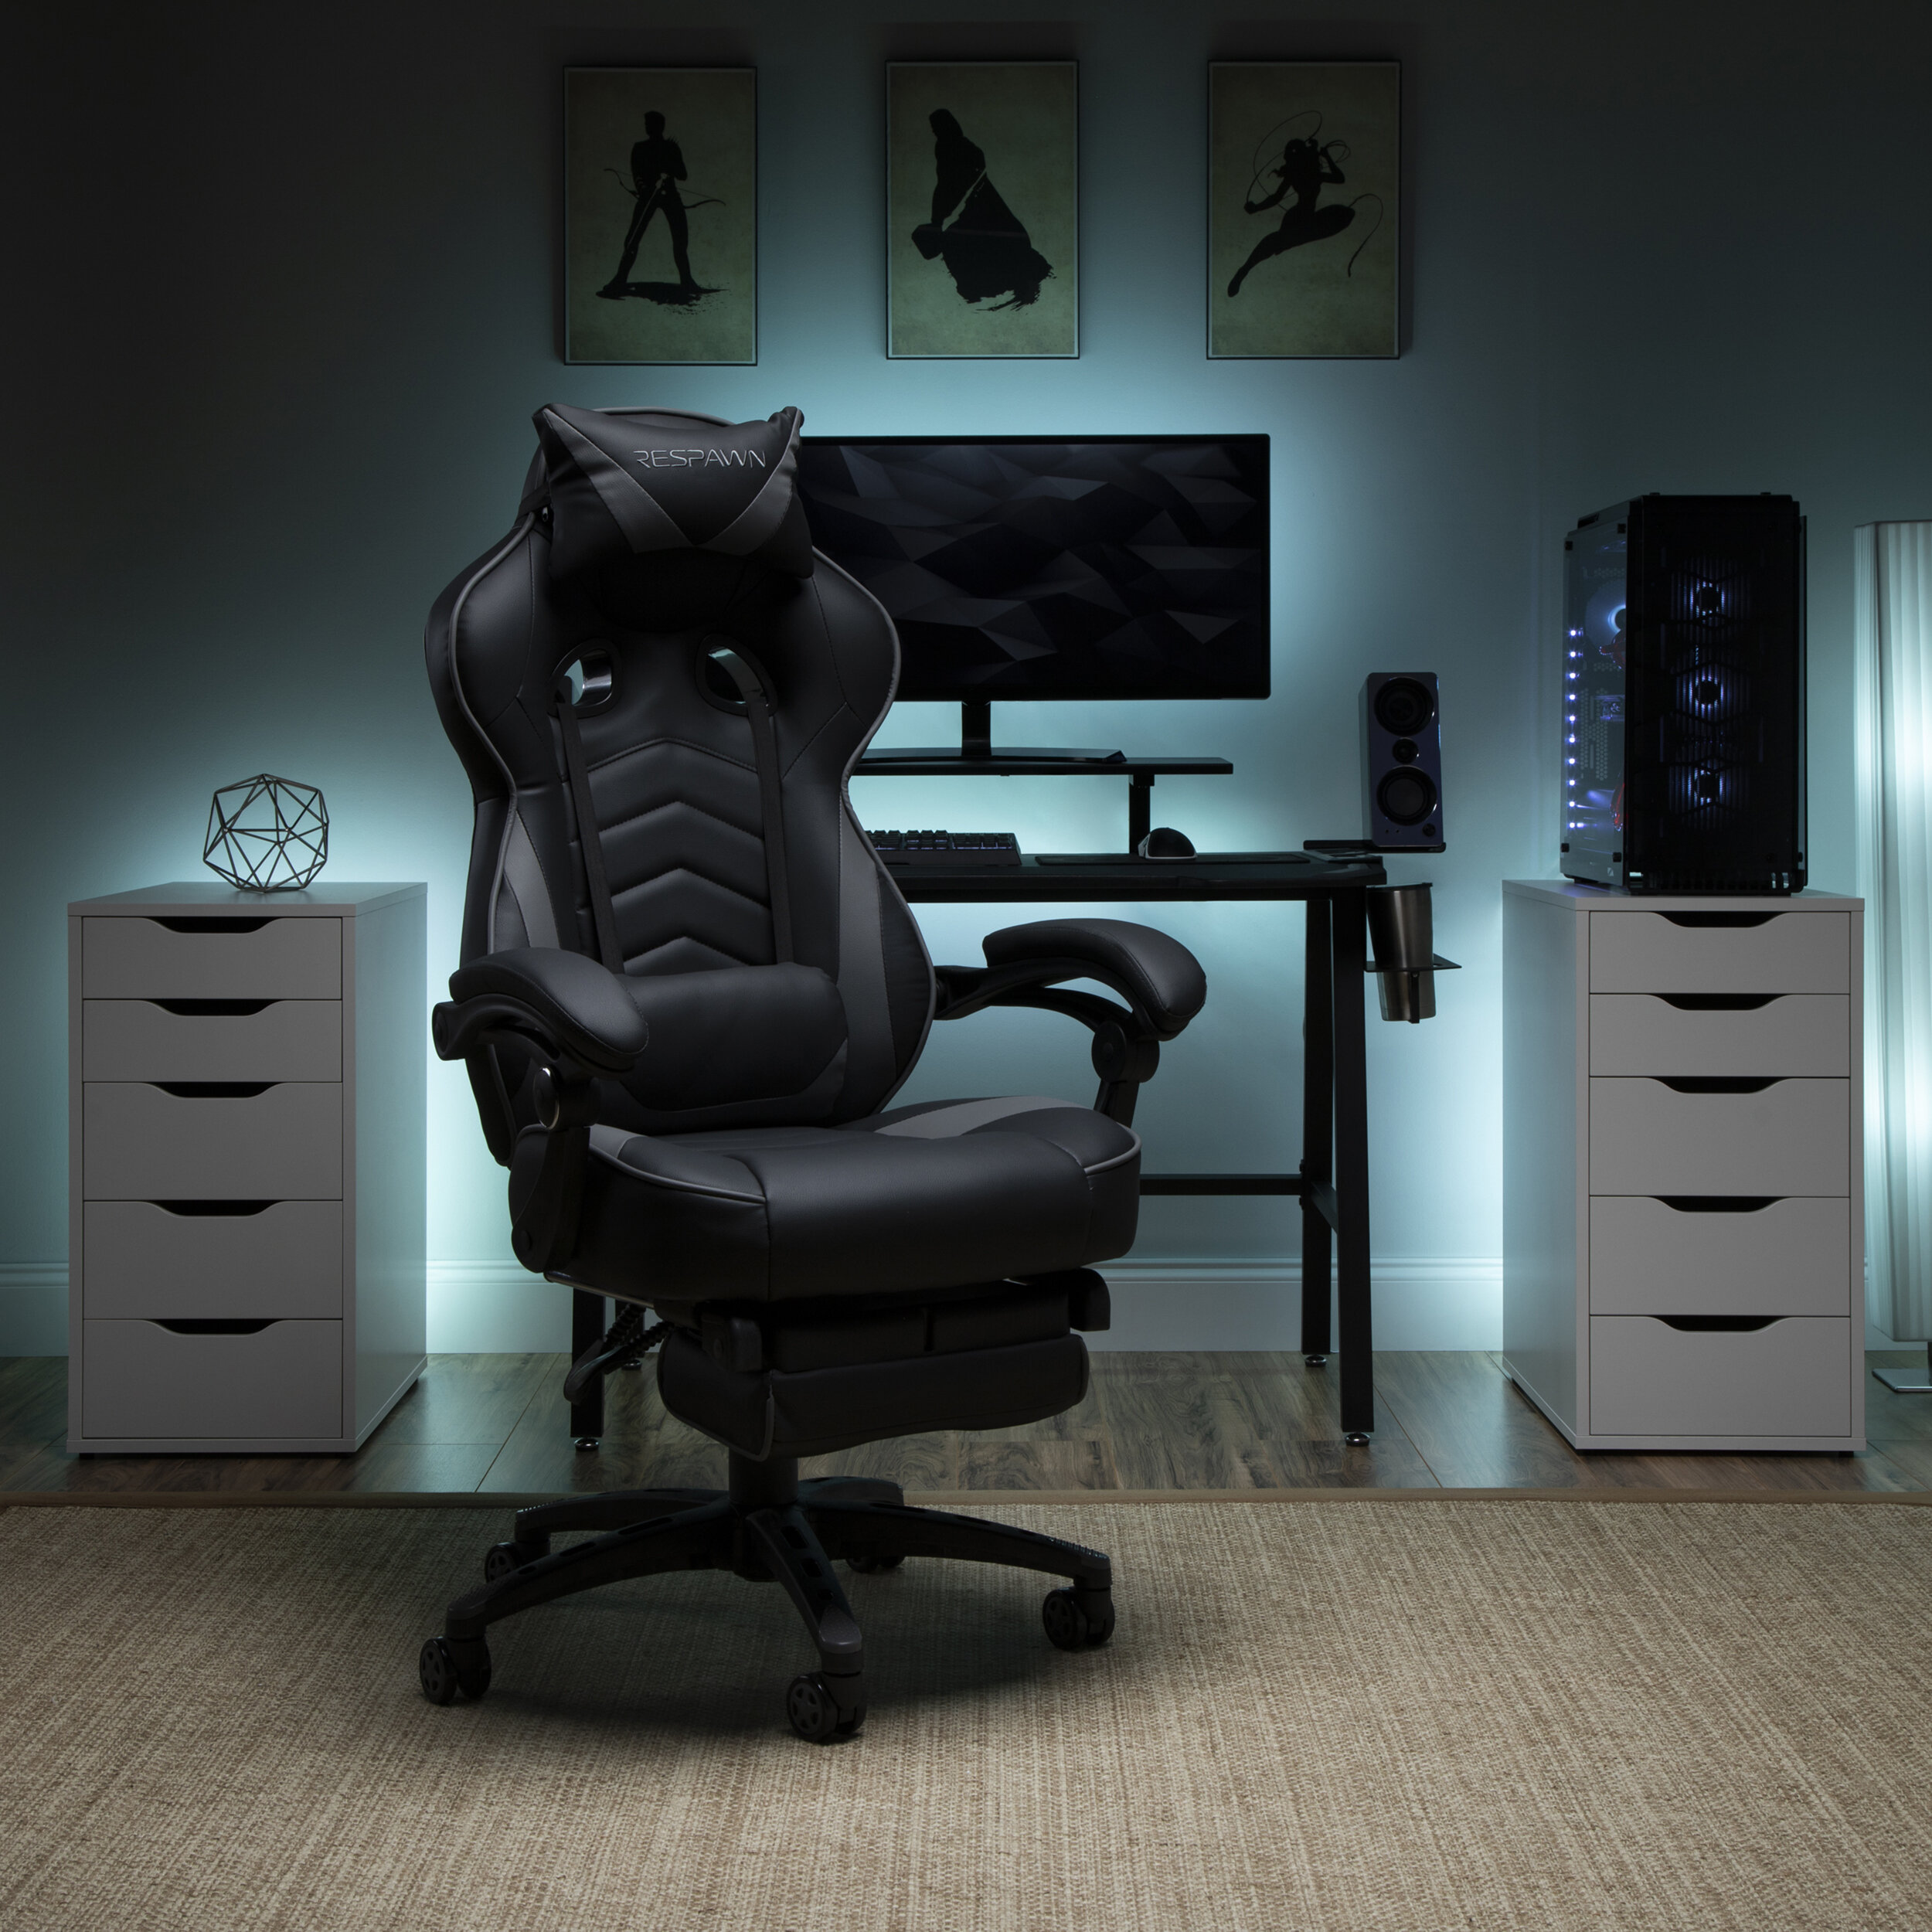 [BIG SALE] Top-Rated Gaming Chairs You’ll Love In 2020 | Wayfair